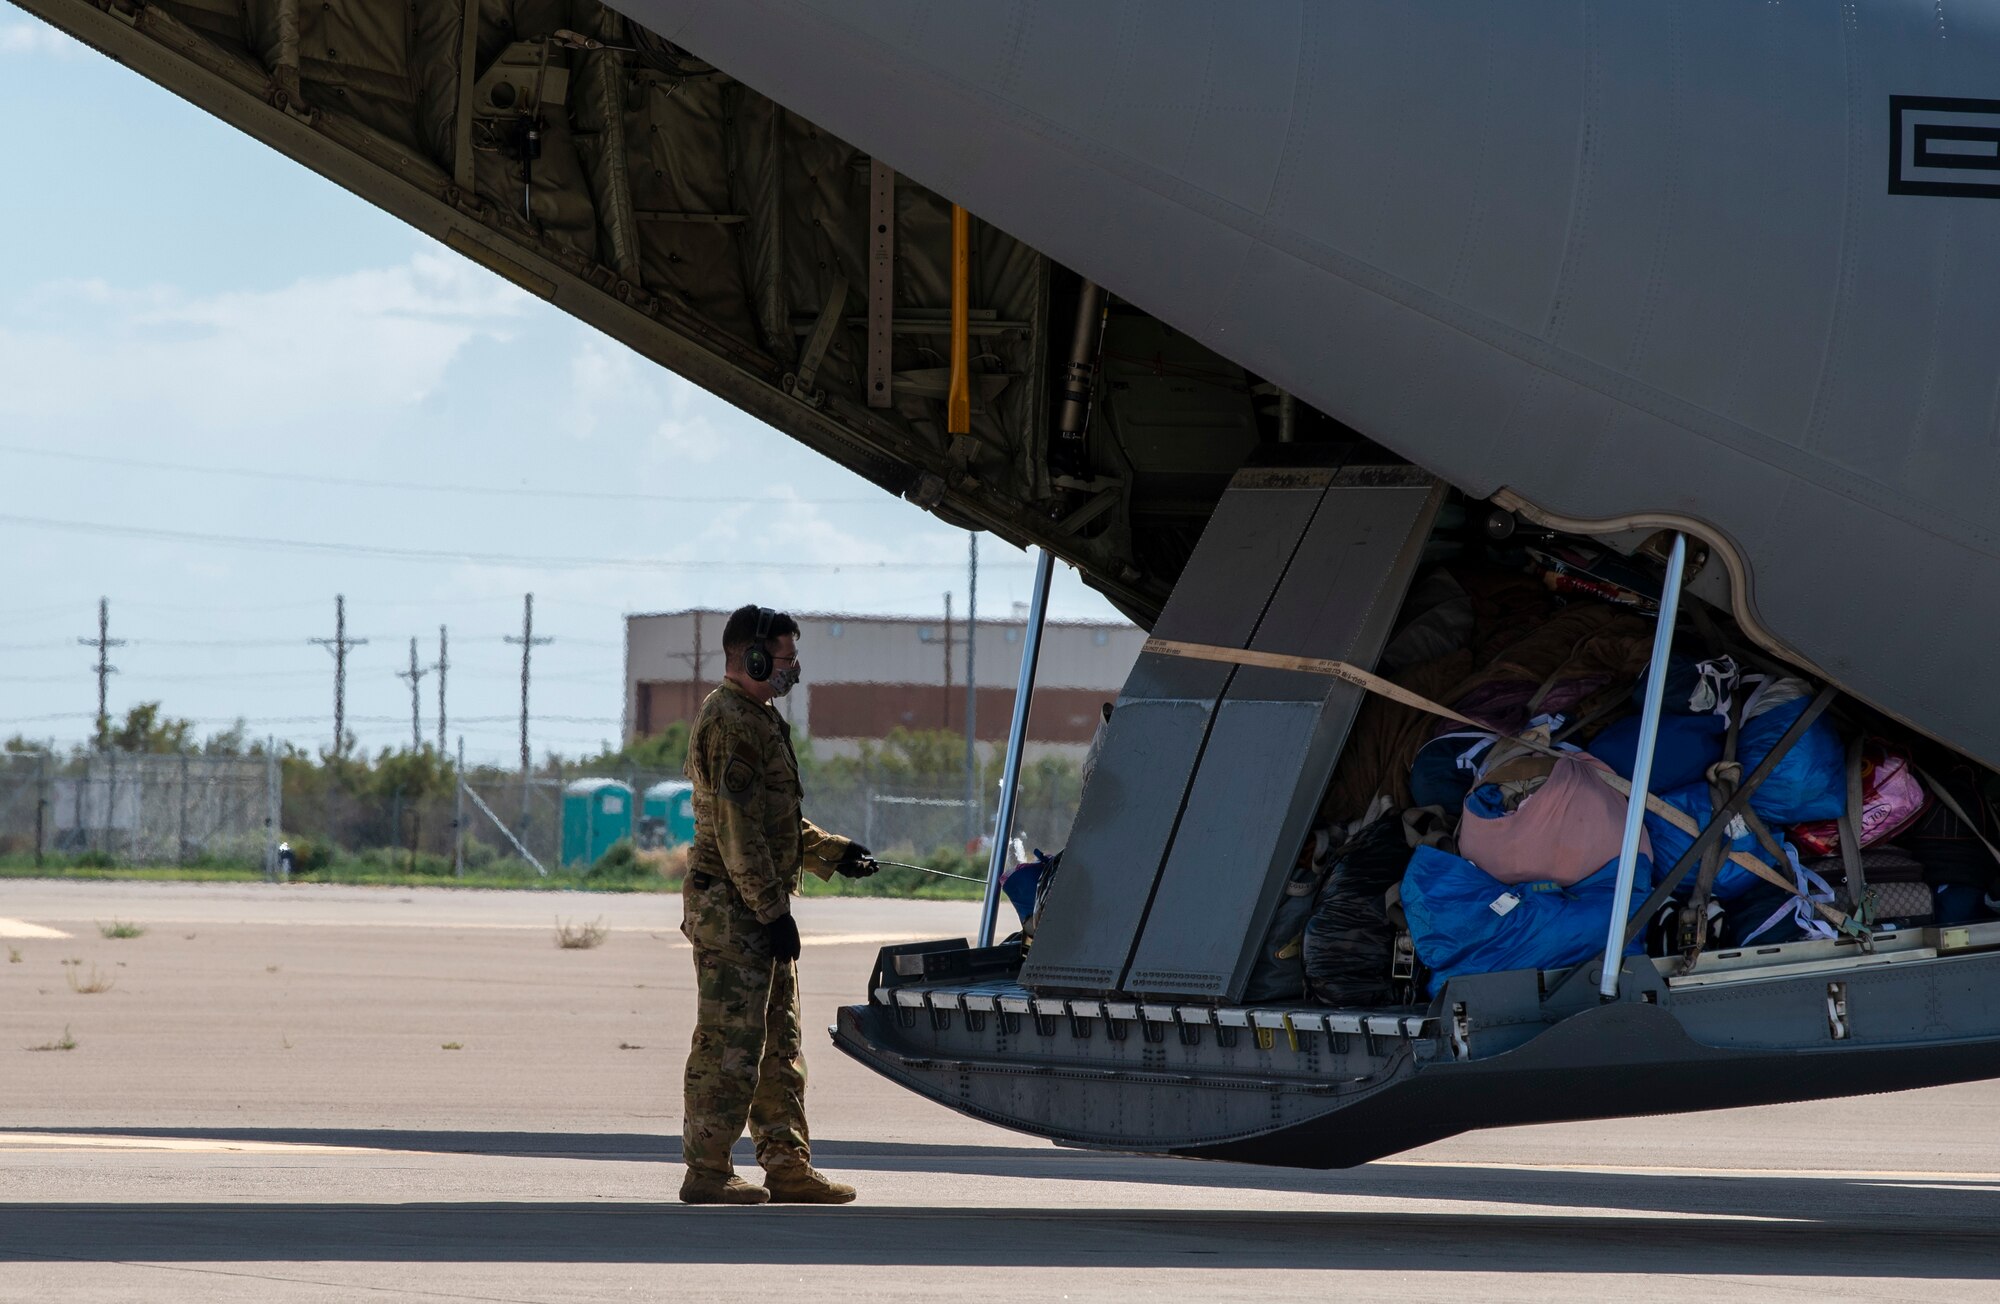 An Airman assigned to Task Force - Holloman prepares to unload luggage in support of Operation Allies Welcome, Aug. 31, 2021, on Holloman Air Force Base, New Mexico. The Department of Defense, through U.S. Northern Command, and in support of the Department of Homeland Security, is providing transportation, temporary housing, medical screening, and general support for up to 50,000 Afghan evacuees at suitable facilities, in permanent or temporary structures, as quickly as possible. This initiative provides Afghan personnel essential support at secure locations outside Afghanistan. (U.S. Air Force photo by Airman 1st Class Jessica Sanchez-Chen)